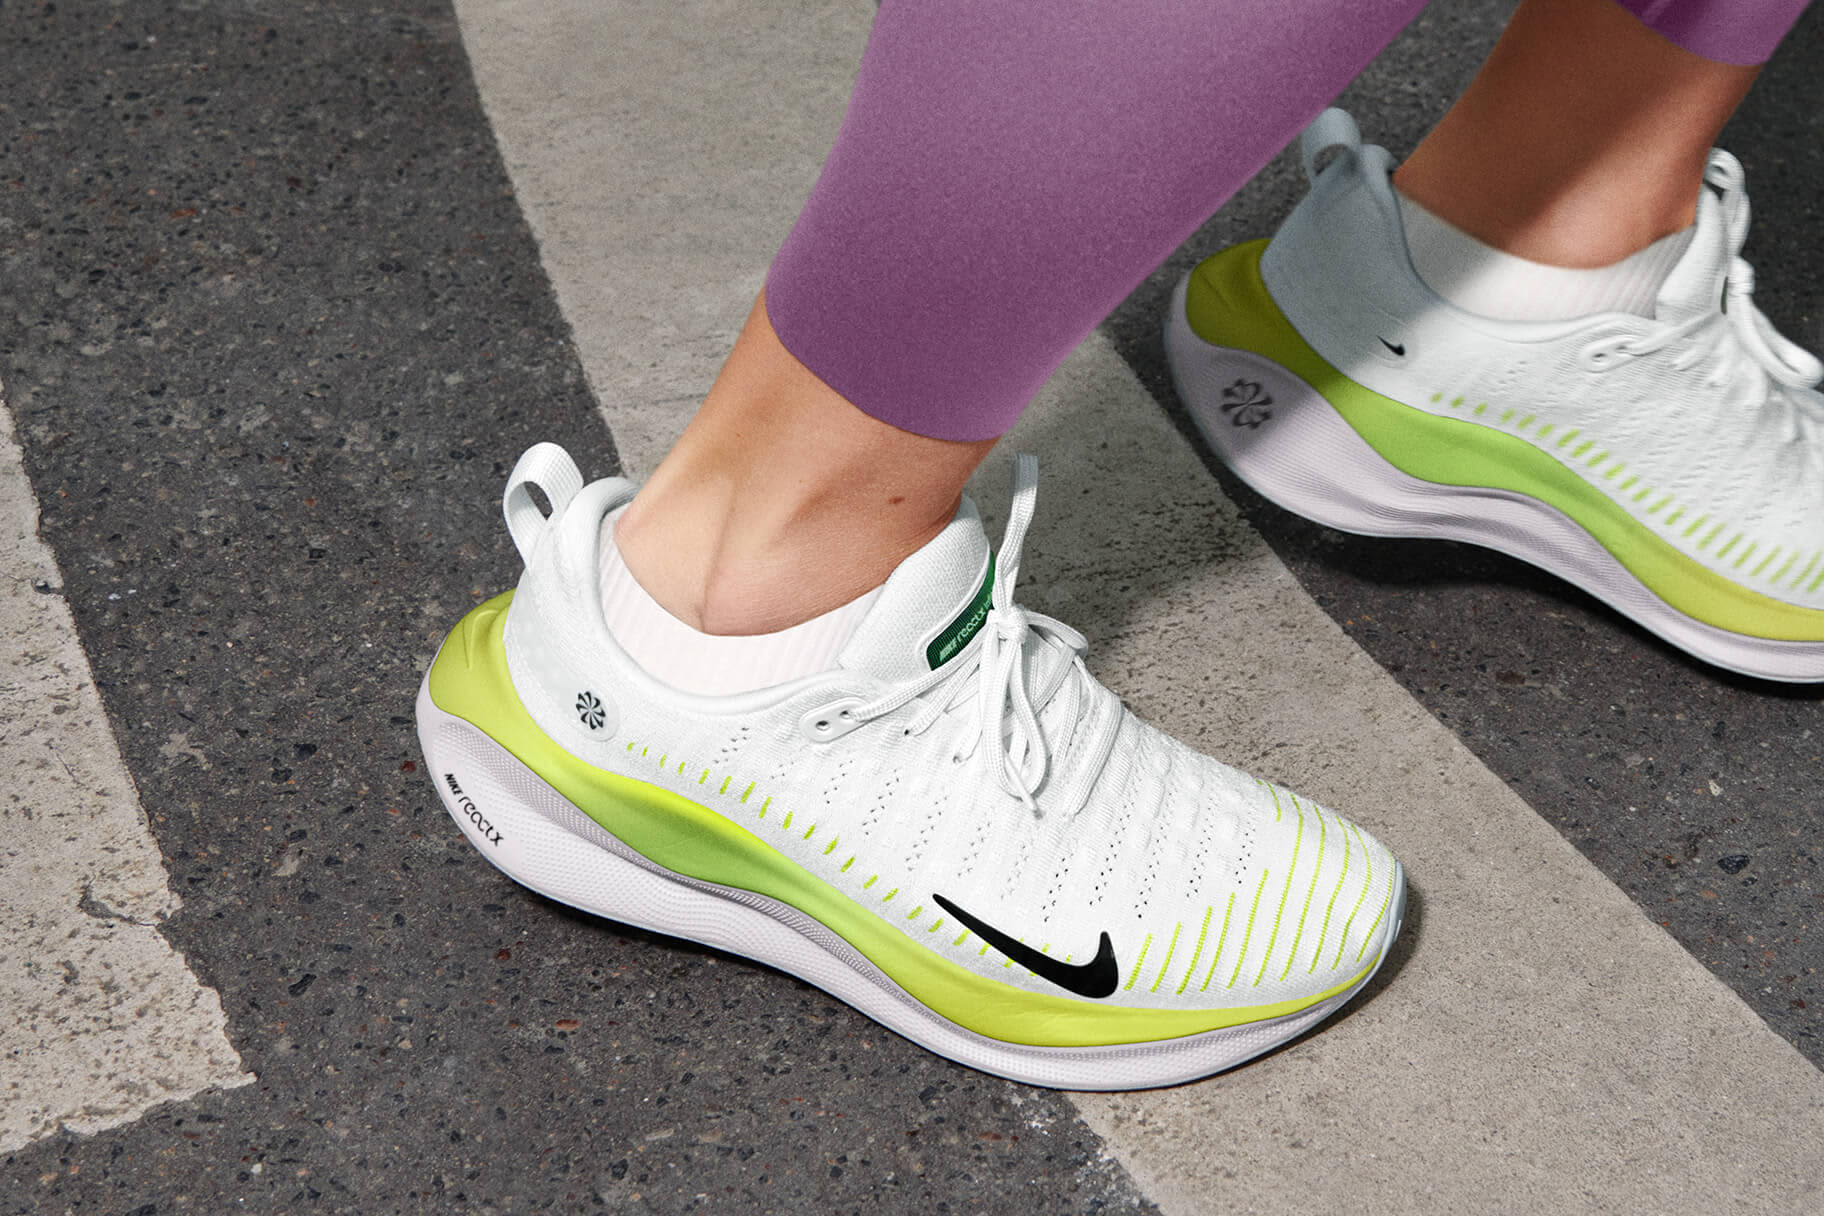 Nike Releases Its ReactX Technology, Aiming To Optimize Energy Return, Lower Carbon Footprint